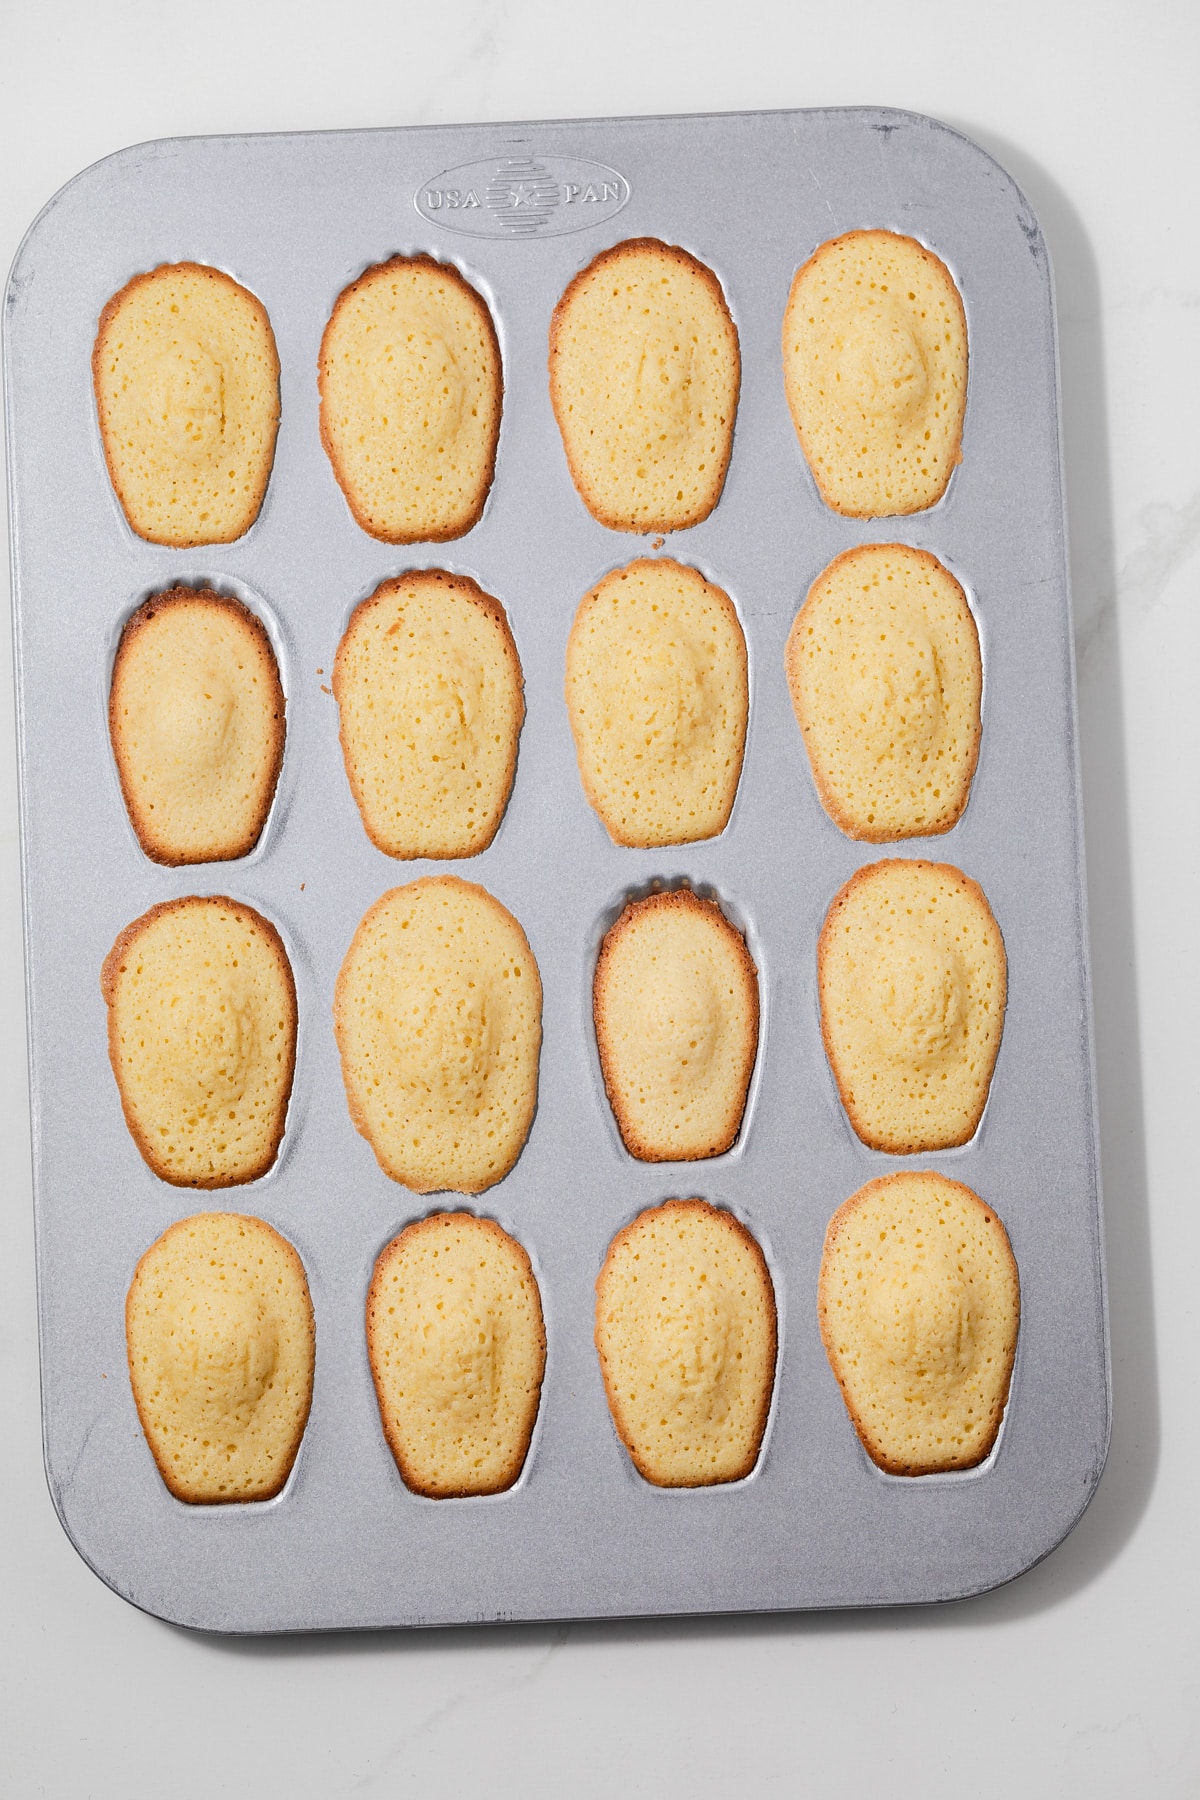 Baked madeleines in a baking pan.